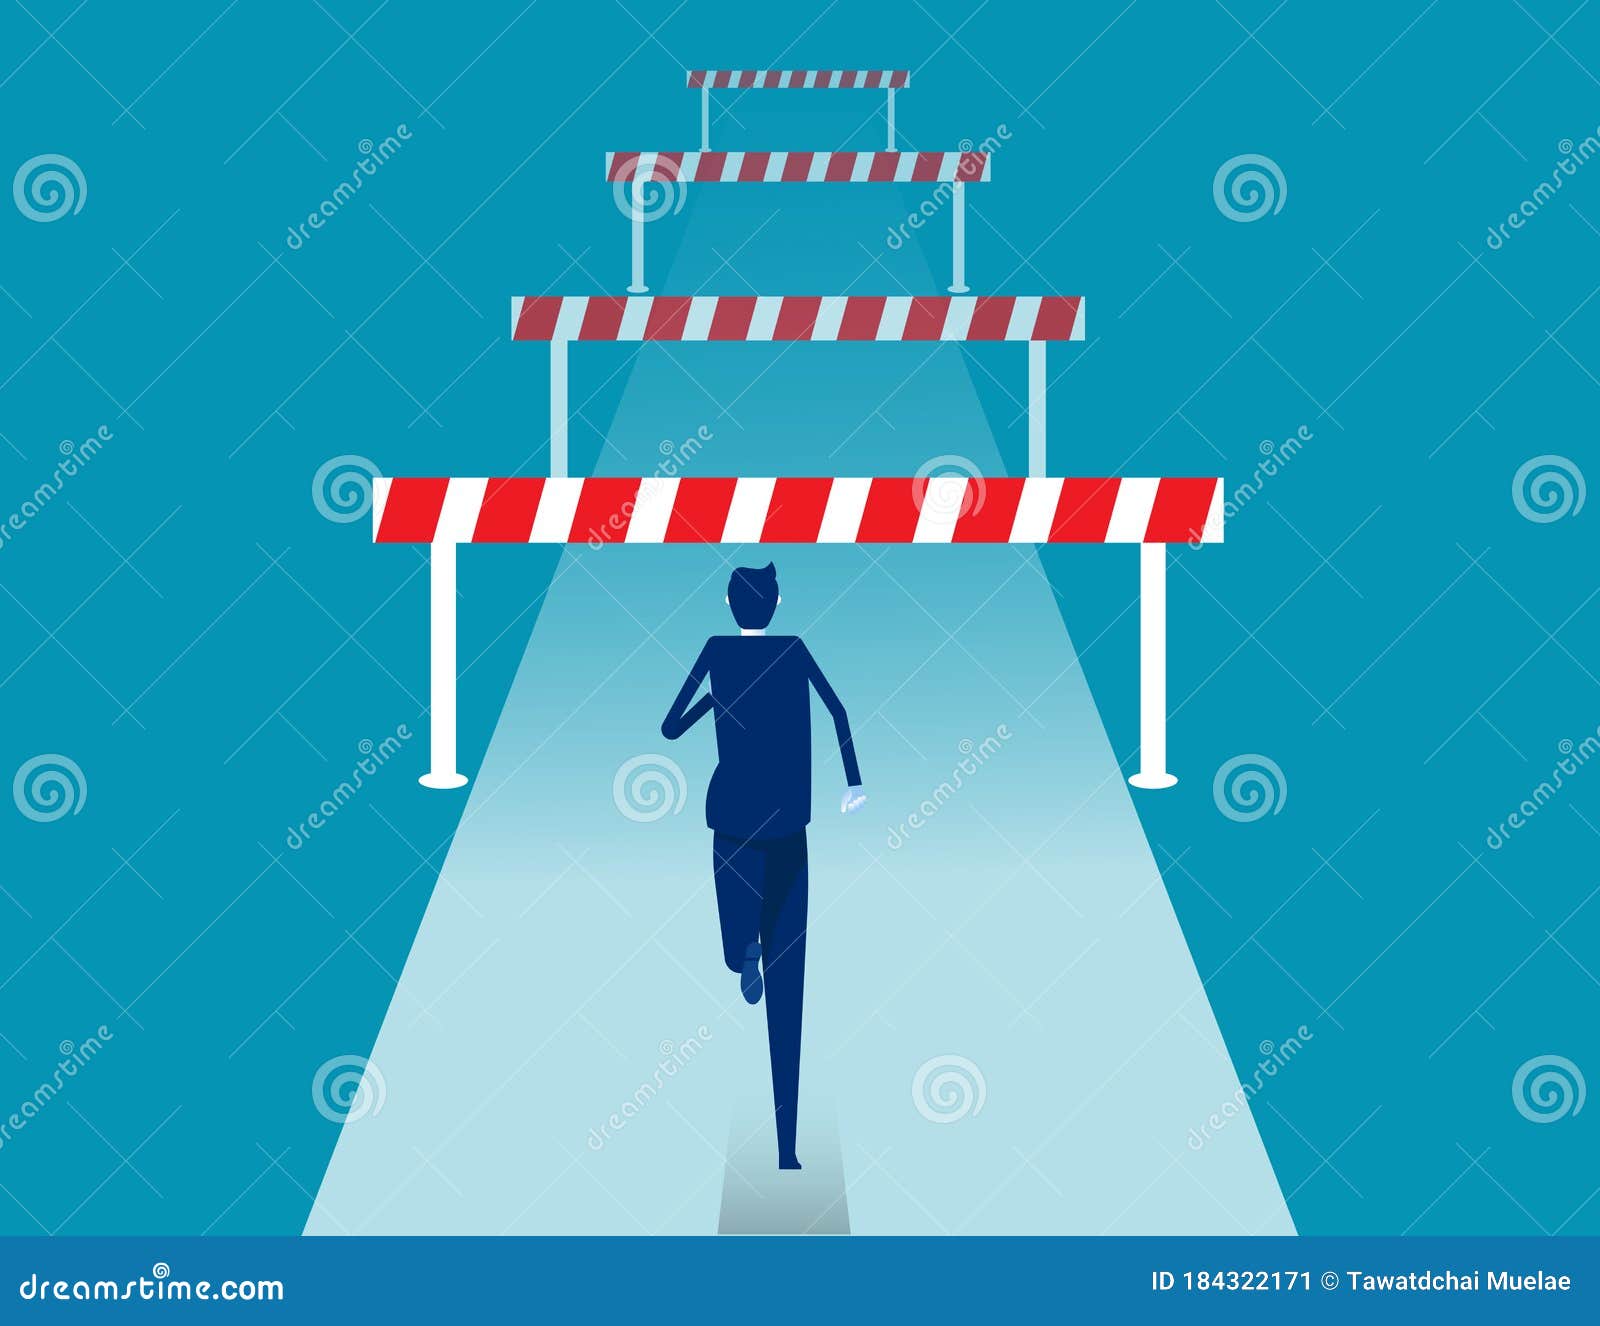 face front of many obstacles. barriers on the way to success concept. flat  cartoon style